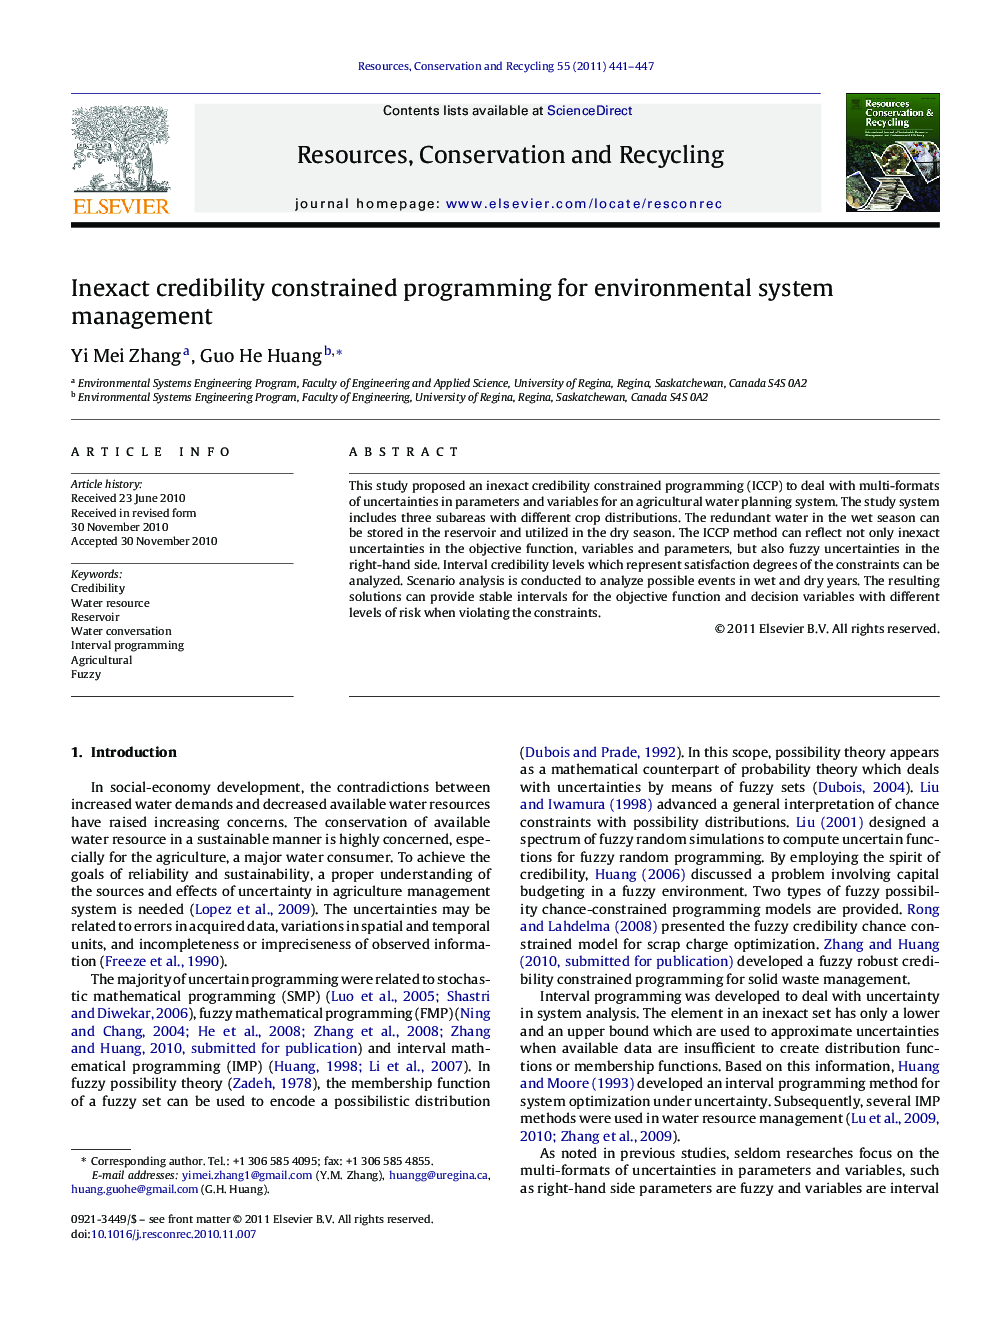 Inexact credibility constrained programming for environmental system management